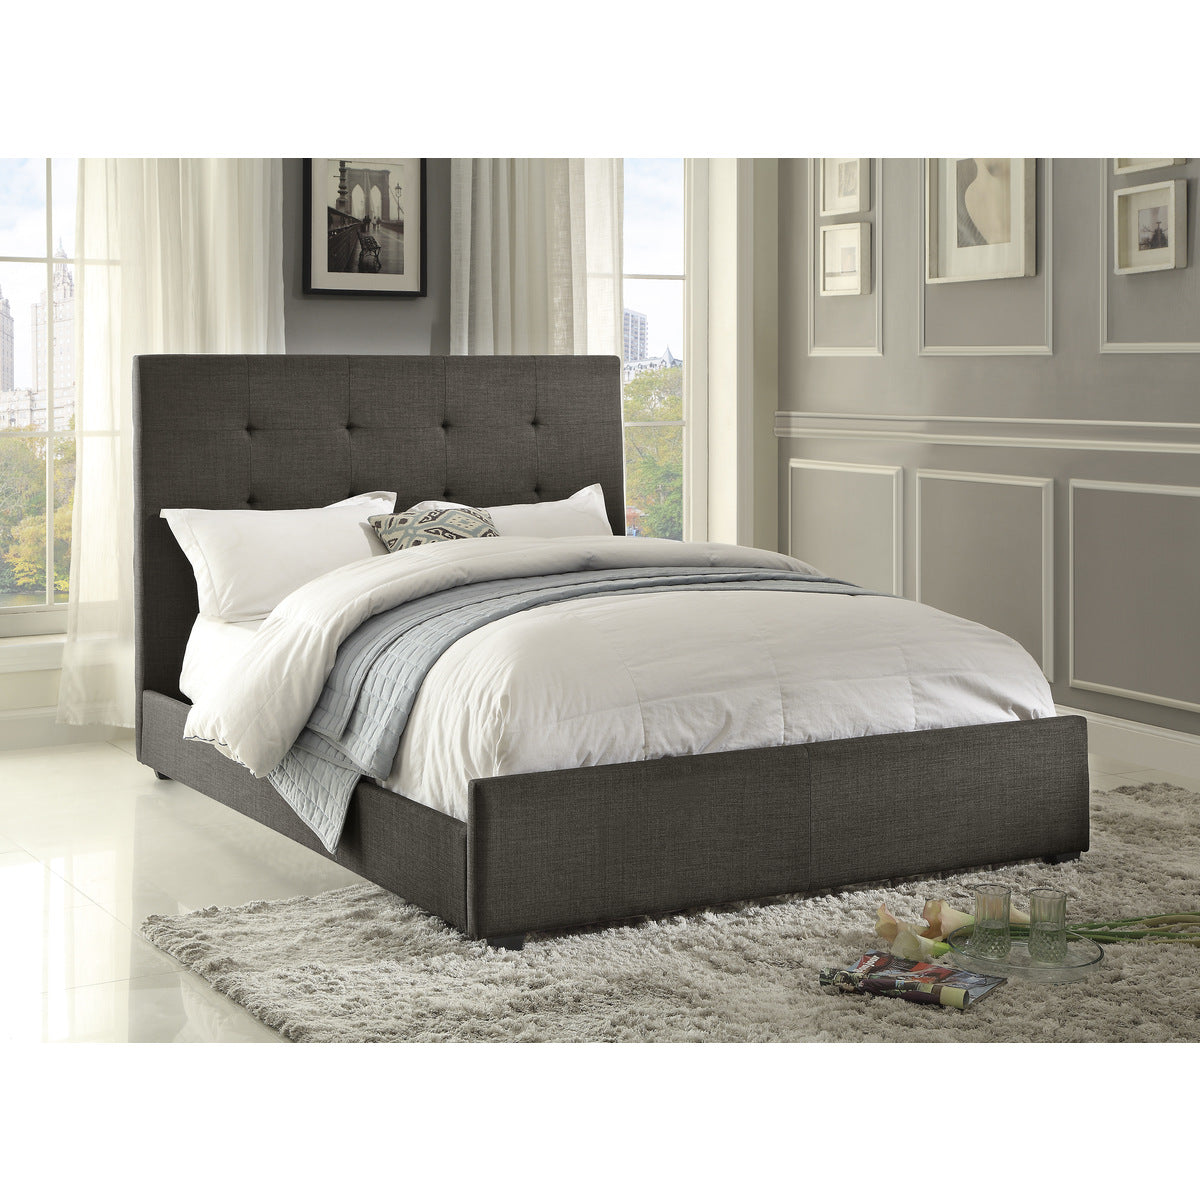 Clissico Bed Frame